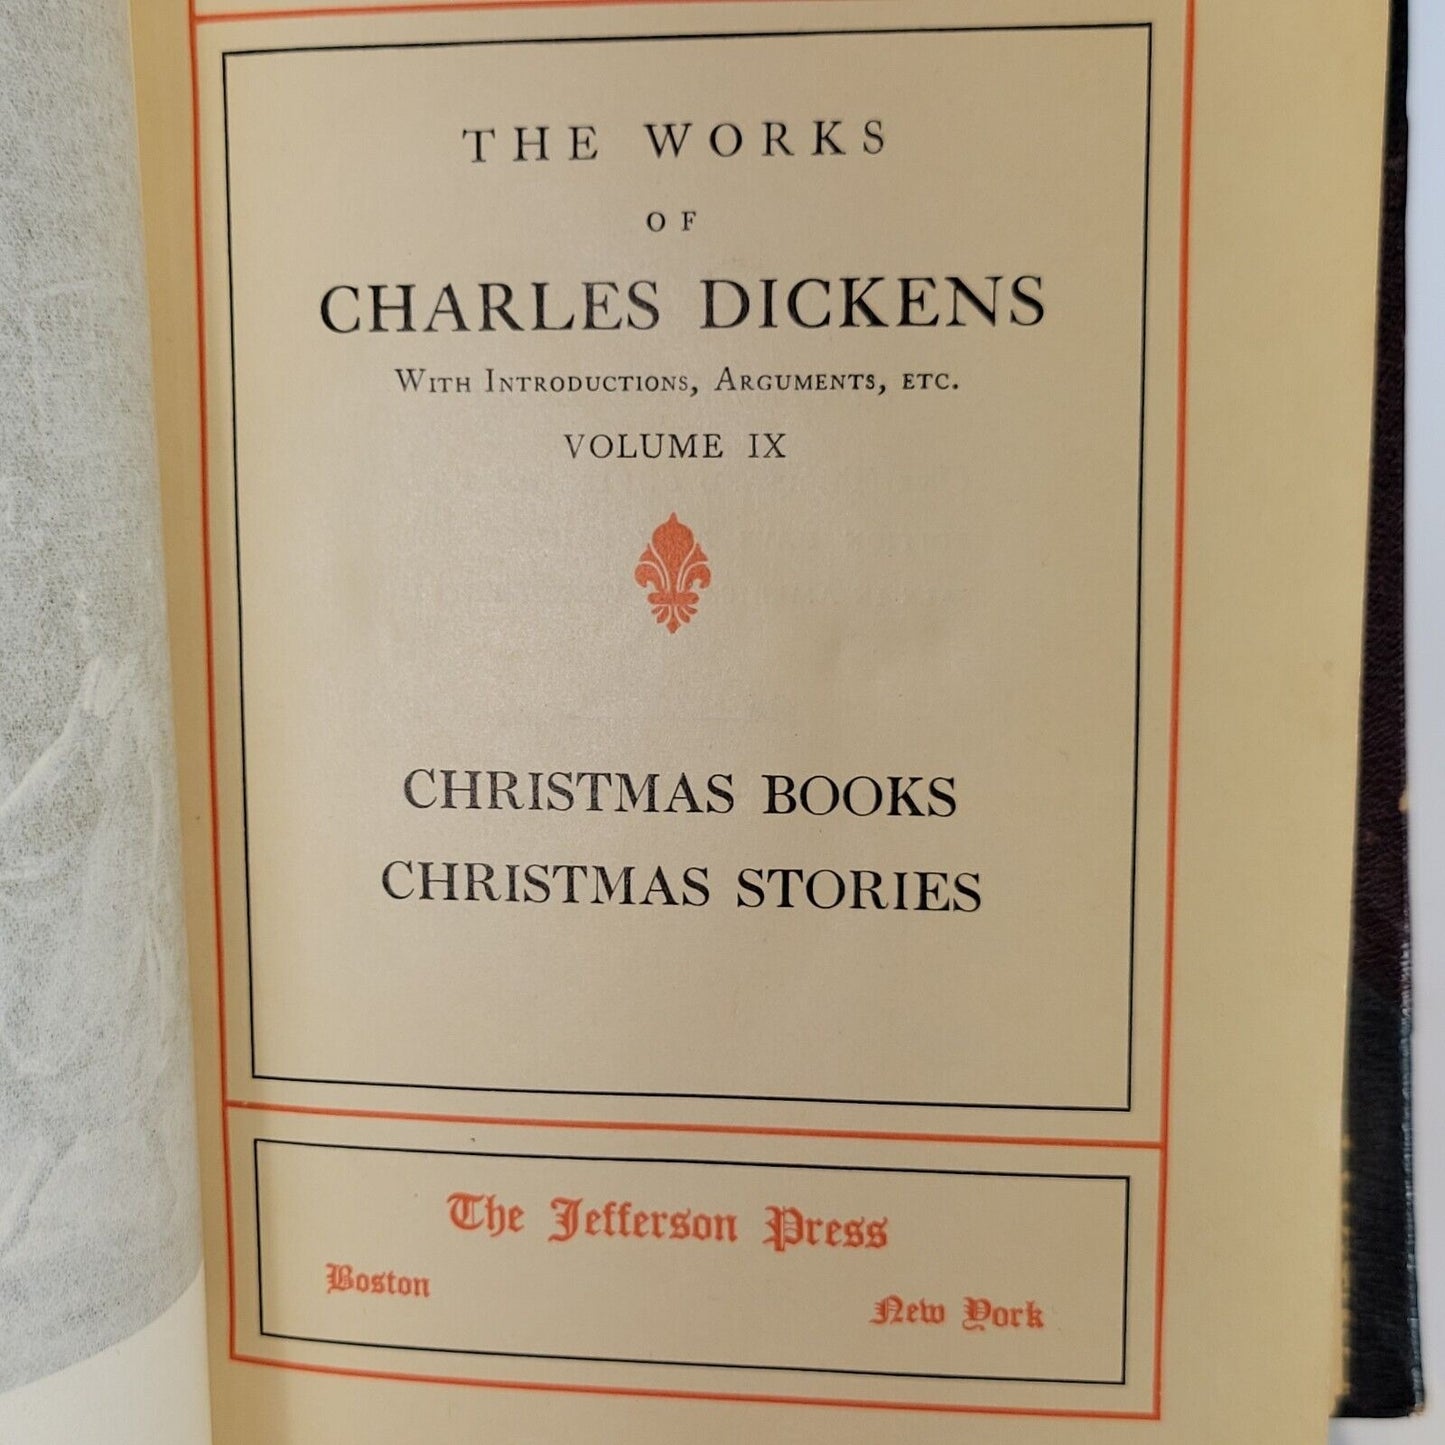 Works Of Charles Dickens: Christmas Books Volume IX Edition de Luxe 1910